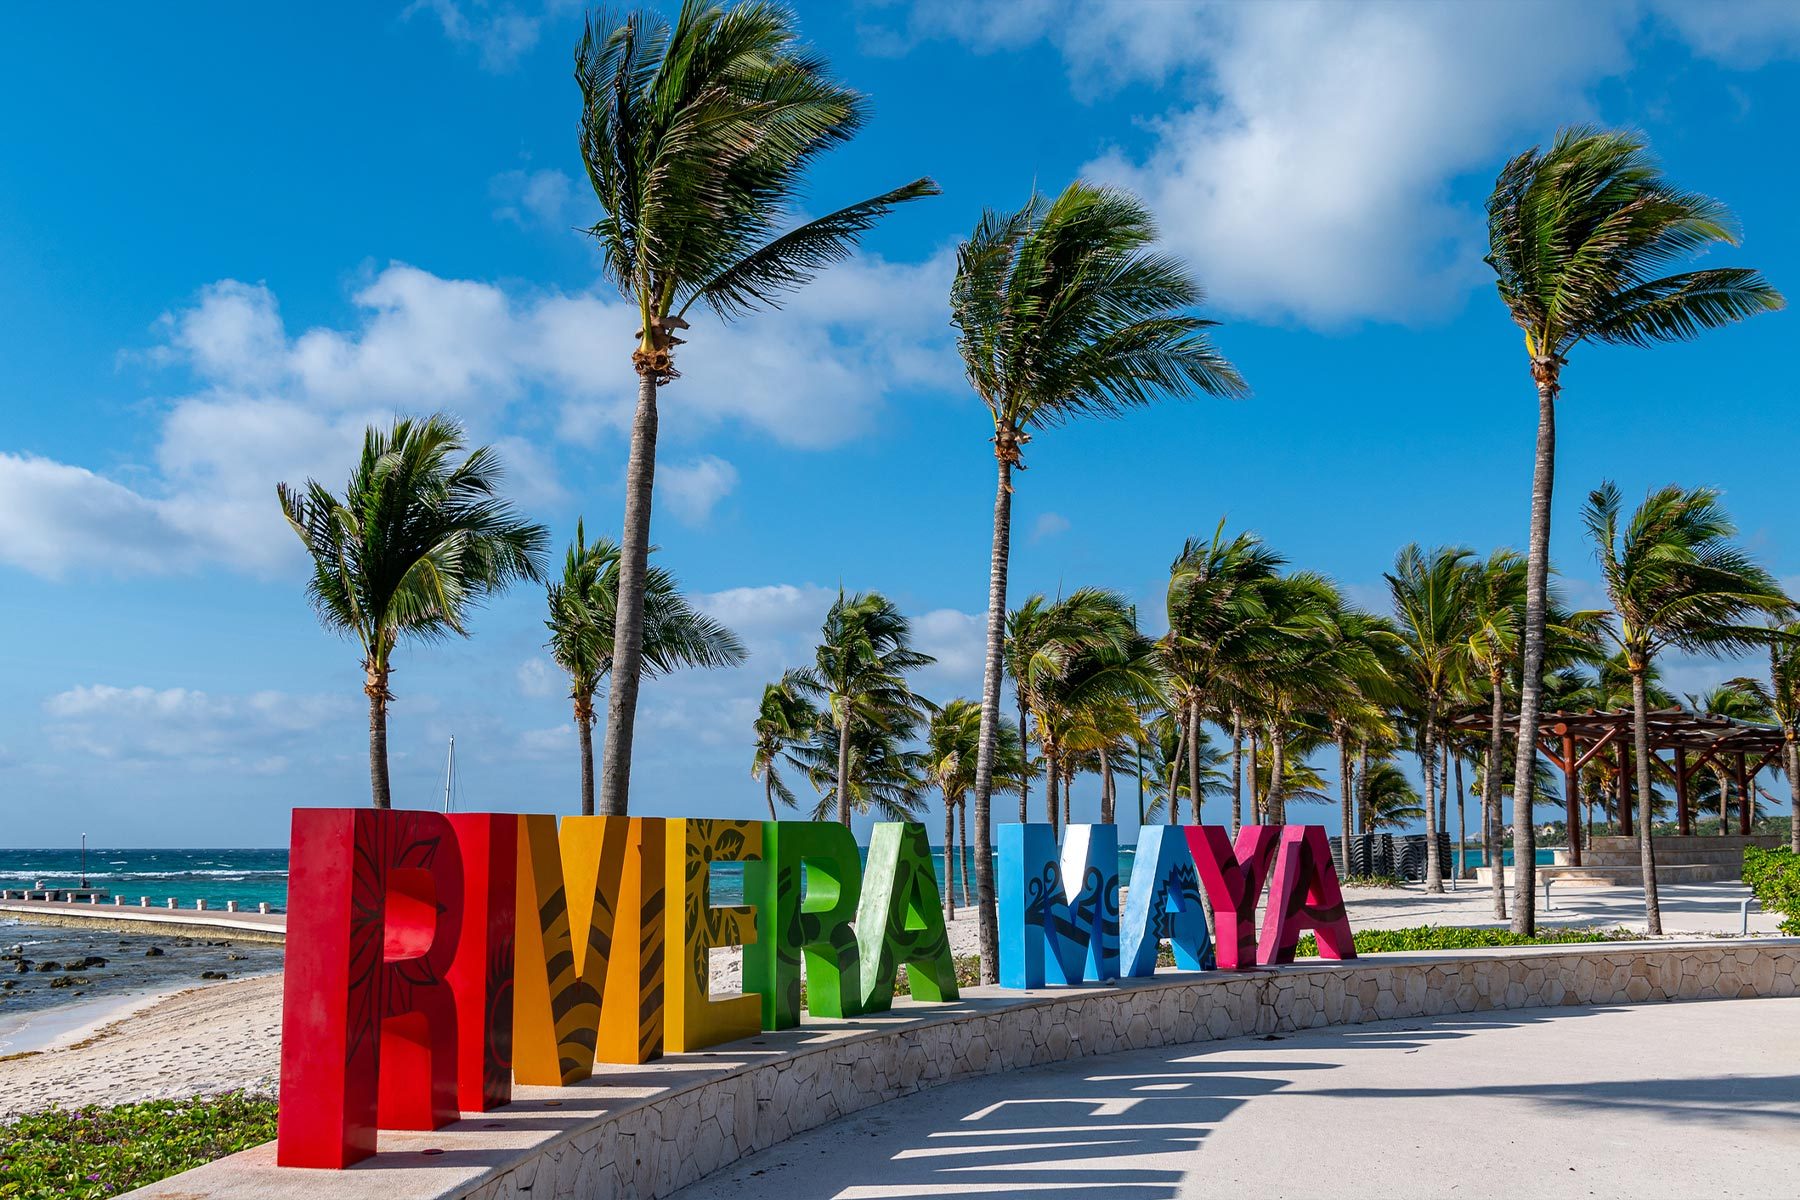 <p>Whether you're looking to stay in a bustling resort town or somewhere a bit more secluded, the Riviera Maya has it all—and ultimately, narrowing down the best place to stay here comes down to the type of vibe you're looking for.</p> <p class="">If you're anything like me and prefer to stay somewhere central (and close to dining, nightlife and attractions), Playa del Carmen is your best bet. What's more, this beach town is Riviera Maya's most bustling, and it's where you'll find some of the region's <a href="https://www.rd.com/list/all-inclusive-resorts/" rel="noopener noreferrer">best all-inclusive resorts</a>. Its main strip, Fifth Avenue, is dotted with bars, restaurants, nightclubs, shops and other entertainment offerings. Playa del Carmen is also home to several large luxury resort complexes, which offer a more secluded and exclusive vibe. (Oh, and did I mention it's less than an hour from Cancún International Airport?)</p> <p>That said, while Playa del Carmen is a fun place to make your home base while in town, the beaches—and hotels—can get crowded, especially if you're traveling outside of the low season and <a href="https://www.rd.com/article/shoulder-season/" rel="noopener noreferrer">shoulder season</a>.</p> <p class="">Tulum is another popular place to stay in the Riviera Maya. It's here where you'll find some of the best white-sand <a href="https://www.rd.com/list/beaches-with-the-clearest-water/" rel="noopener noreferrer">beaches with the clearest water</a>—along with some incredible Mayan ruins. The town is also home to an array of luxury boutique properties that are primarily geared toward grown-ups, so it's especially great for couples craving a <a href="https://www.rd.com/list/romantic-weekend-getaways/" rel="noopener noreferrer">romantic weekend getaway</a>. (Spoiler alert, not all Riviera Maya resorts are massive and filled with families!)</p> <p>Another option is Puerto Morelos, a quaint town that's famous for its fishing and snorkeling opportunities; it's about halfway between Cancún and Playa del Carmen. Despite its picturesque beaches and turquoise waters, Xpu Há, which is situated between Tulum and Playa del Carmen, flies under the radar (for now, at least). Other options include Akumal (featuring colorful coral reefs and sugar-sand beaches) and Puerto Aventuras (a residential complex and resort that just so happens to be the second-largest community in Solidaridad Municipality after Playa del Carmen).</p> <h2>Is it better to go to Cancún or Riviera Maya?</h2> <p>Both Cancún and Riviera Maya are beautiful beach destinations, but deciding between the two can be tricky. Keep in mind that Riviera Maya is bigger than Cancún, since it comprises several different resort towns. Since the Riviera Maya is so vast, it also boasts more hotel options. While there are some great <a href="https://www.rd.com/list/best-all-inclusive-resorts-cancun/" rel="noopener noreferrer">all-inclusive resorts in Cancún</a>, you may find more variety across Riviera Maya resorts.</p> <p>Also, keep in mind that if you travel to Cancún around <a href="https://www.rd.com/list/tripadvisor-spring-break-experiences/" rel="noopener noreferrer">spring break</a> time, you may encounter some rowdiness.</p> <h2 class="">How we chose the best Riviera Maya resorts</h2> <p>Finding the best Riviera Maya resorts was, put simply, no easy feat. To start, most travelers flock to Riviera Maya for the pristine stretches of sand, and for this reason, it was important to select only those hotels with beach access—which, as a longtime Riviera Maya vacationer, I know is a must. I've been to the region several times as a child, teen and now adult; I've also traveled here with my parents and siblings, as well as with my spouse and a handful of other families on some epic group getaways. So when handpicking these hotels, it was important for me to include a selection of resorts that would be suitable for travelers of all ages and abilities.</p> <p>Of course, it was also important to feature a combination of traditional and <a href="https://www.rd.com/list/all-inclusive-resort-tips/" rel="noopener noreferrer">all-inclusive resorts</a>. Bonus: Each pick has a minimum of four-and-a-half stars, and several of them even have perfect five-star ratings!</p> <p>We also aimed to feature Riviera Maya resorts across all budgets, which is why you'll notice such a wide range of price points, from as low as $200 to well over $1,000 per night. And since some people love sprawling resorts, while others prefer a smaller, more intimate hotel, size was another important factor to consider when compiling this list. We also looked for properties that offered amenities like kids clubs, all-suite accommodations and non-motorized water sports.</p> <p>Have we got your attention yet? Keep scrolling to view all the best Riviera Maya resorts for every type of traveler.</p>